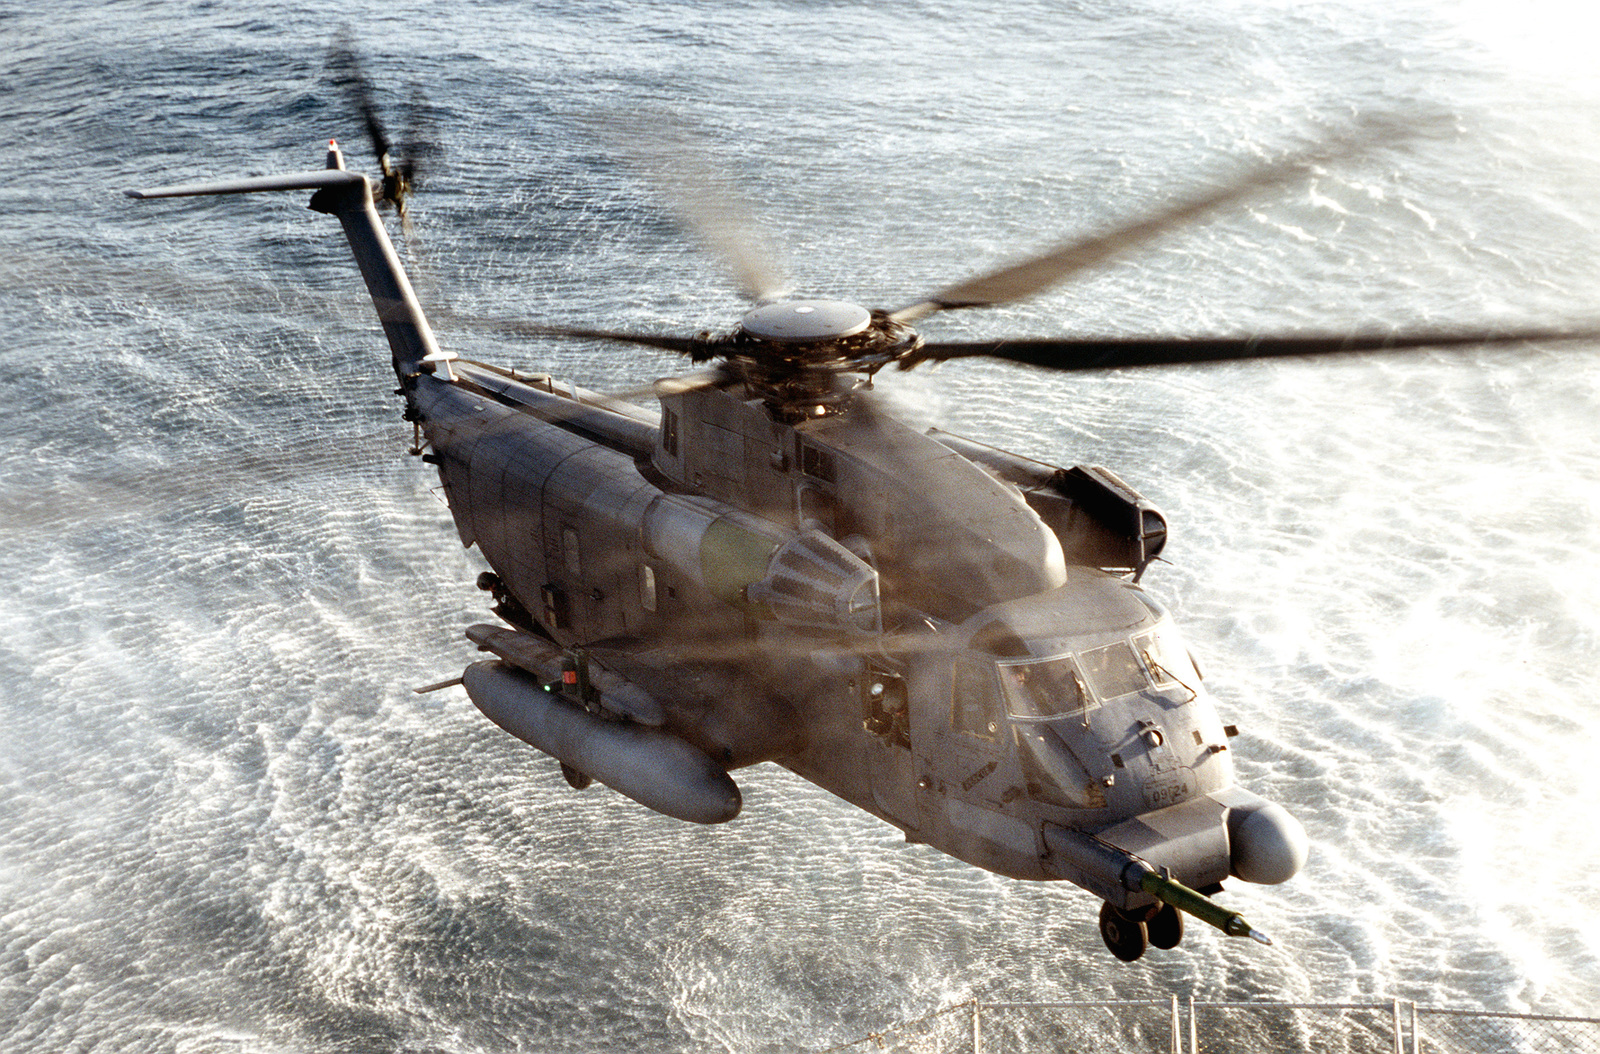 Mh-53 Pave Low